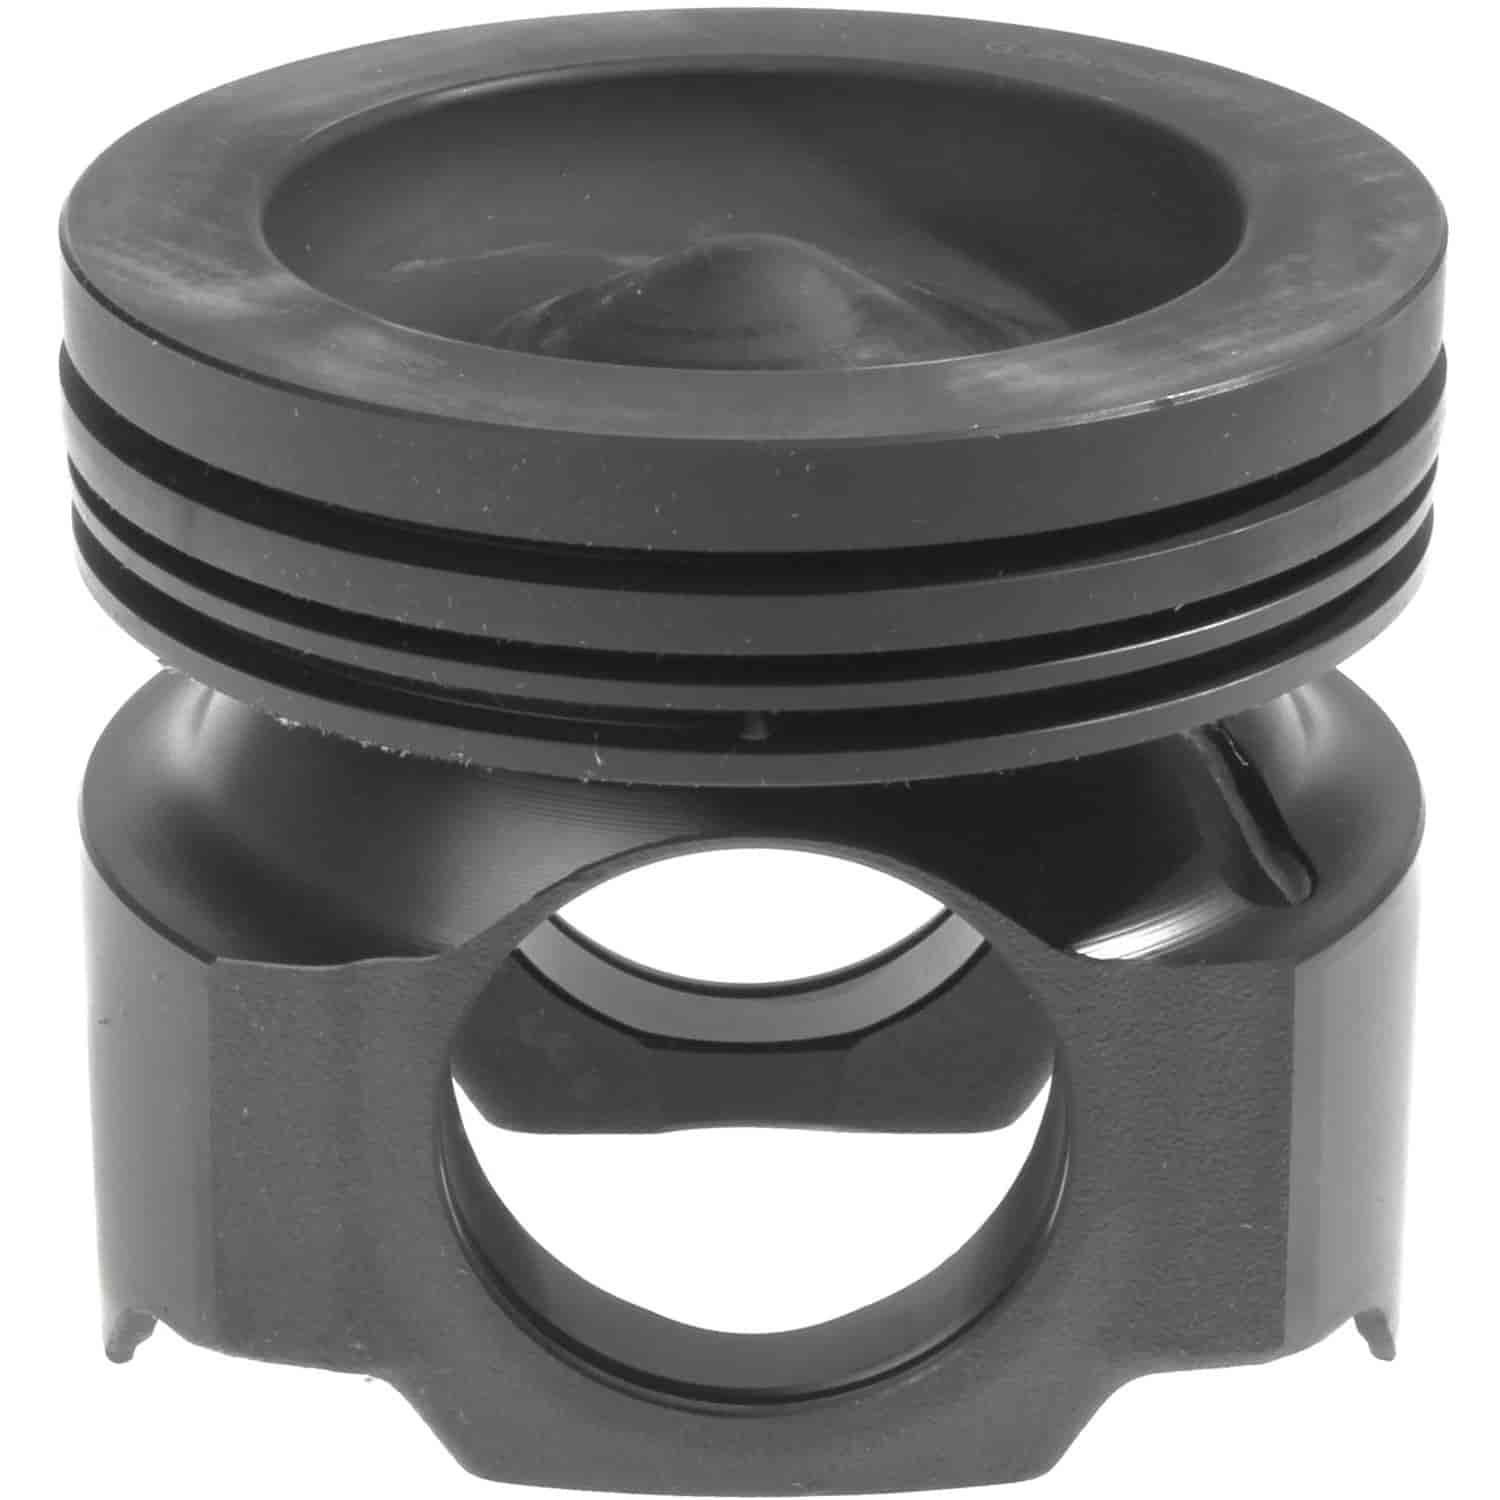 Piston Crown Cat. 137mm/5.400 Bore C15 18.0 1 CR Monotherm without bushing BXS1-Up